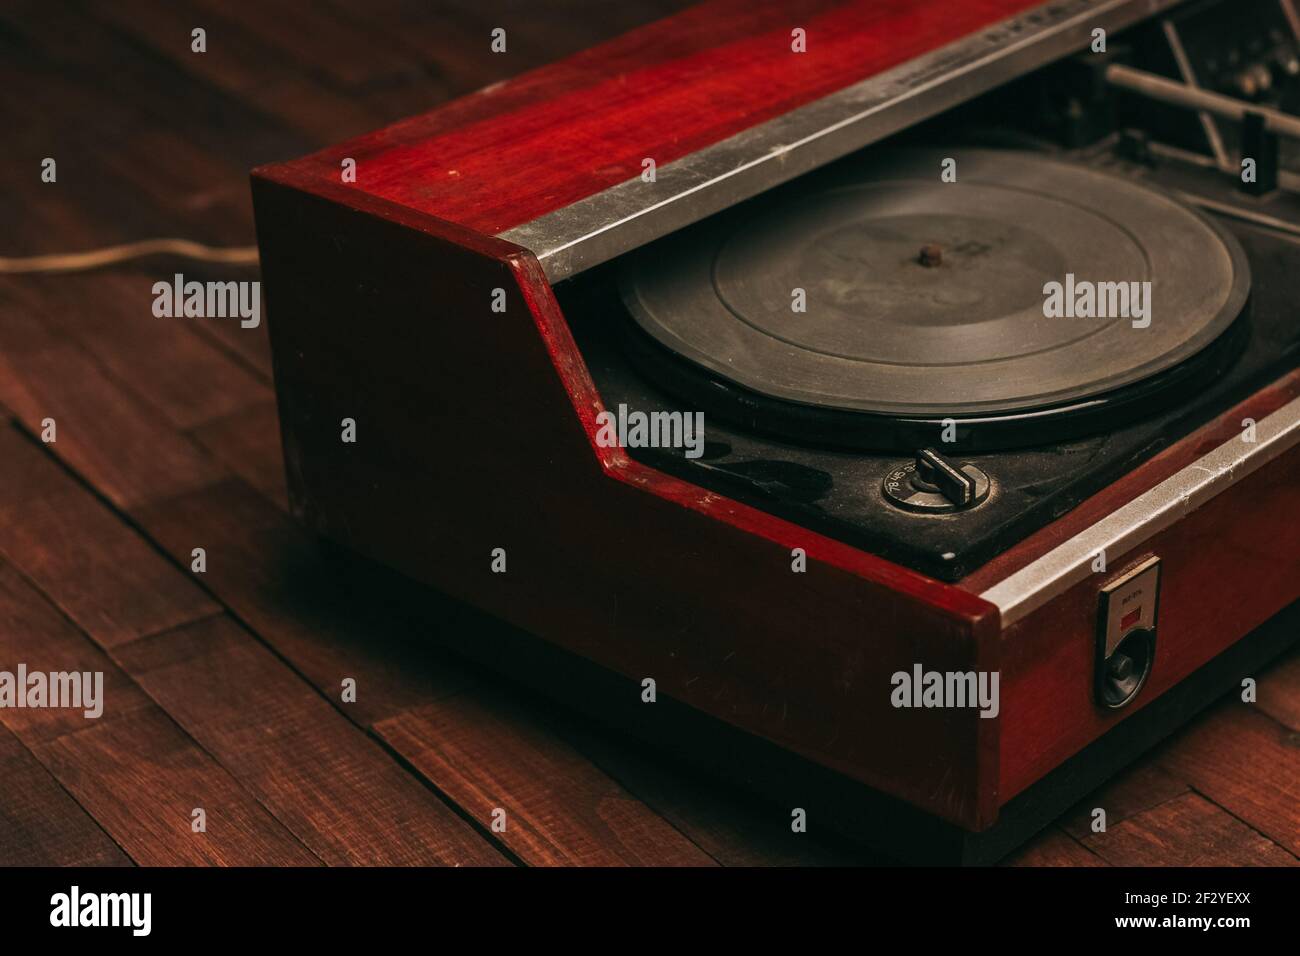 retro turntable old collection technology musical instruments Stock Photo